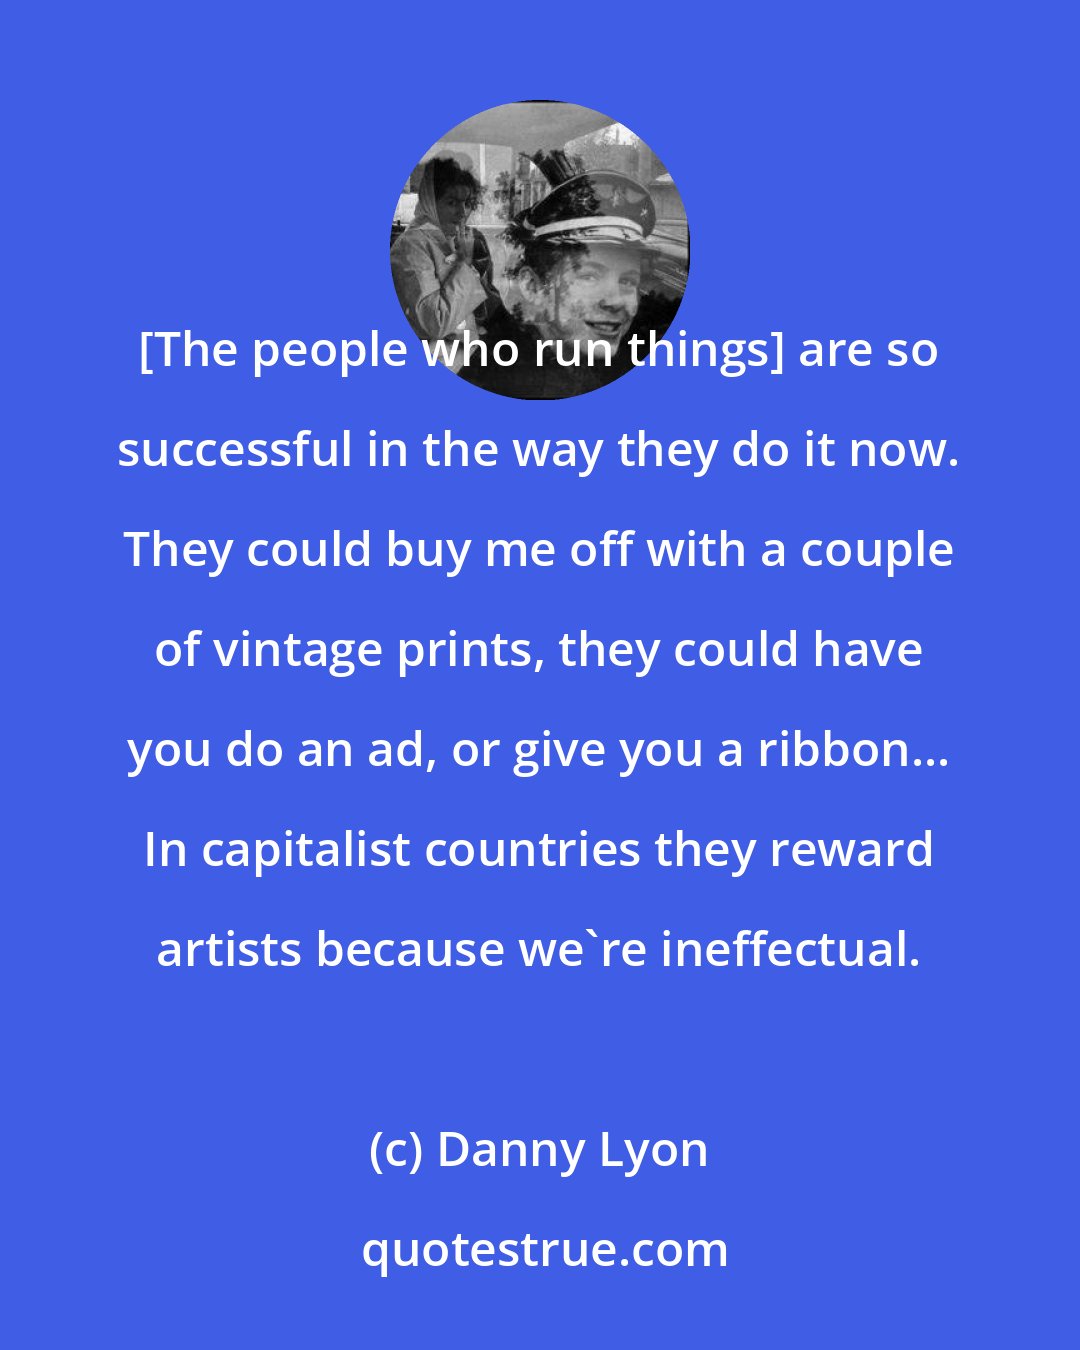 Danny Lyon: [The people who run things] are so successful in the way they do it now. They could buy me off with a couple of vintage prints, they could have you do an ad, or give you a ribbon... In capitalist countries they reward artists because we're ineffectual.